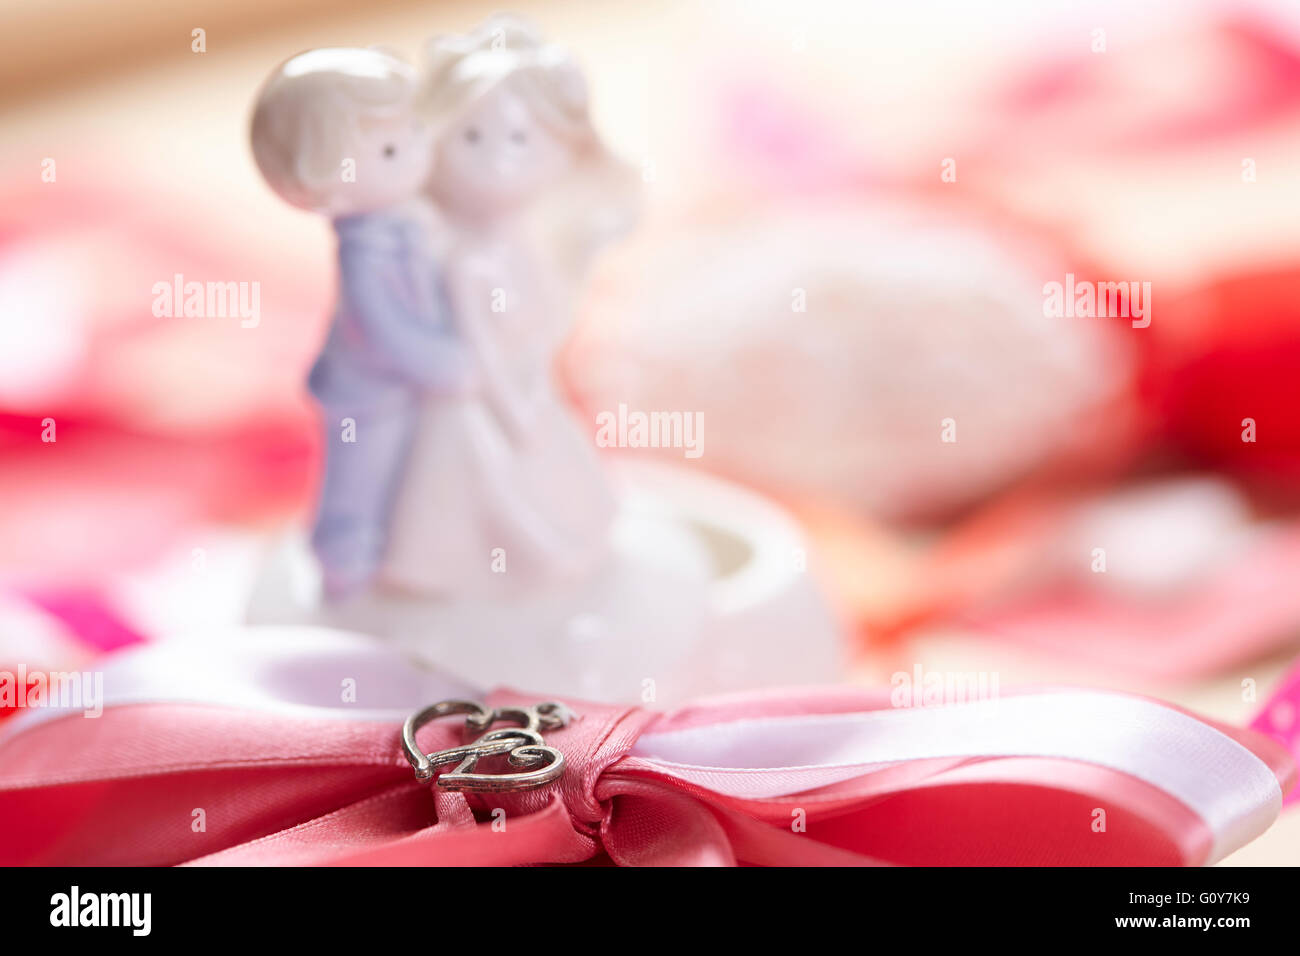 beautiful pink bow and hearts couple Stock Photo